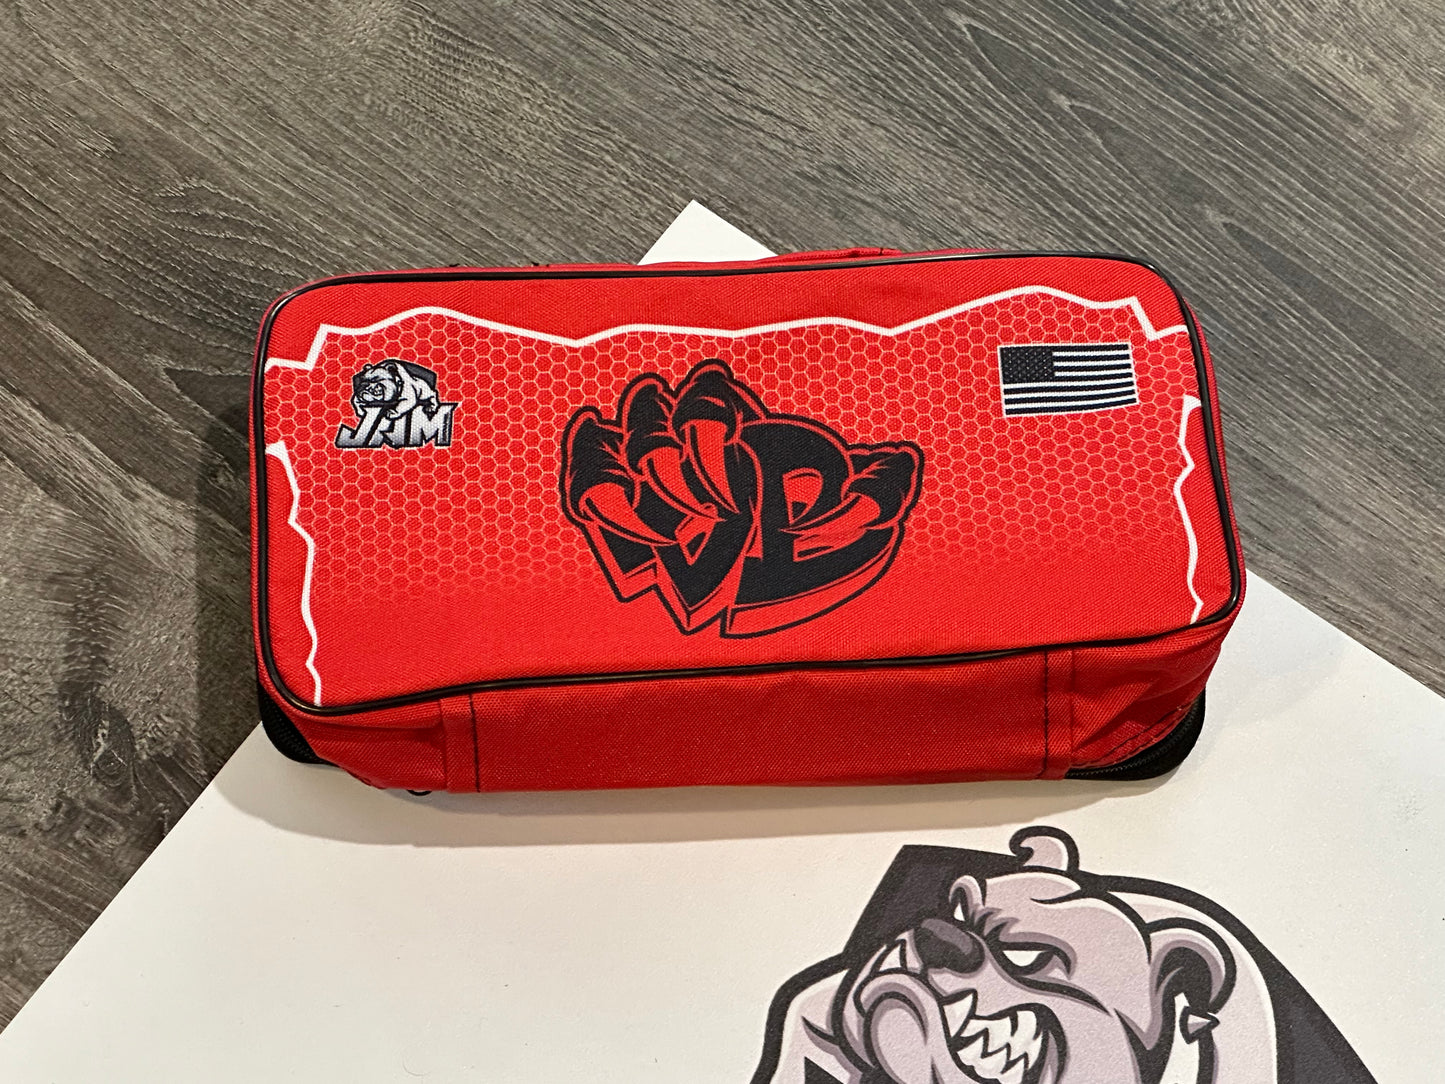 (NEW)Draggin Bags Claw Cornhole Bag Pouch - Red Base w/Red Black Claw